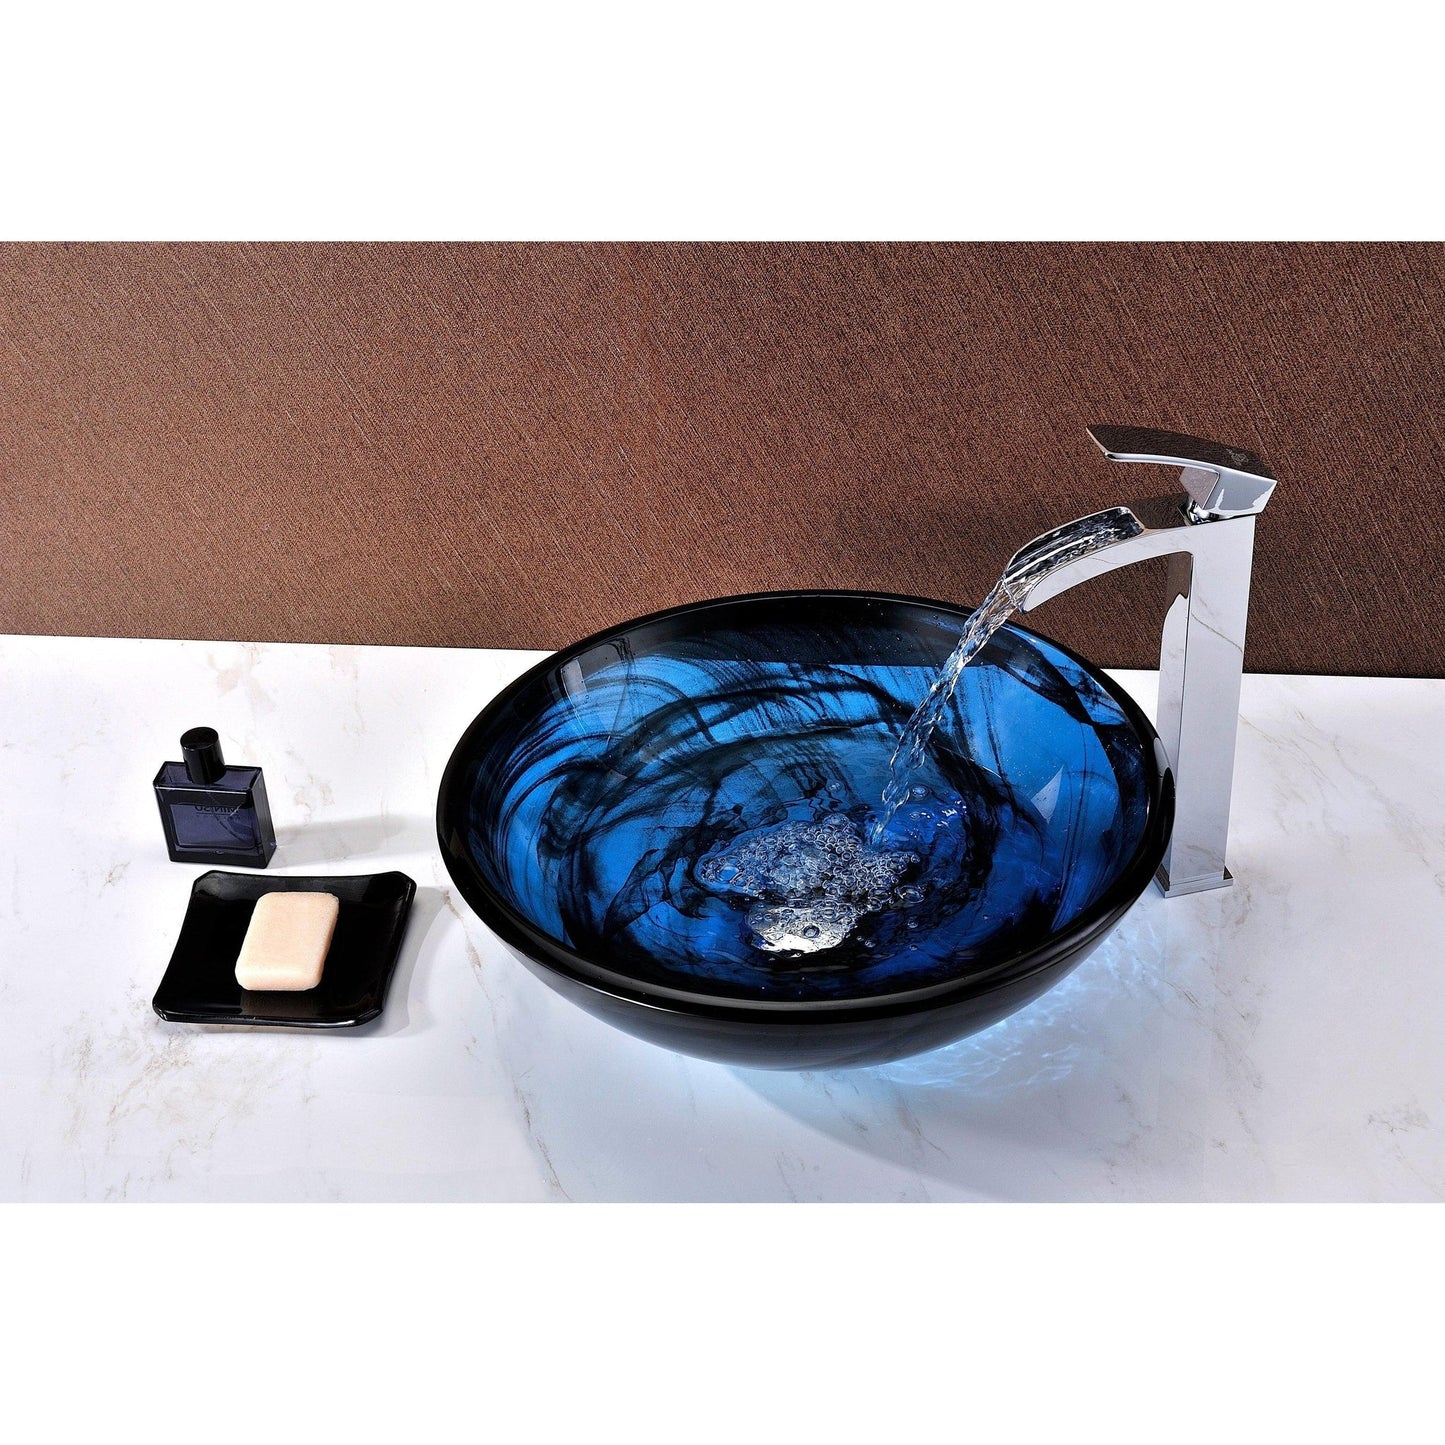 ANZZI Soave Series 17" x 17" Round Sapphire Wisp Deco-Glass Vessel Sink With Polished Chrome Pop-Up Drain